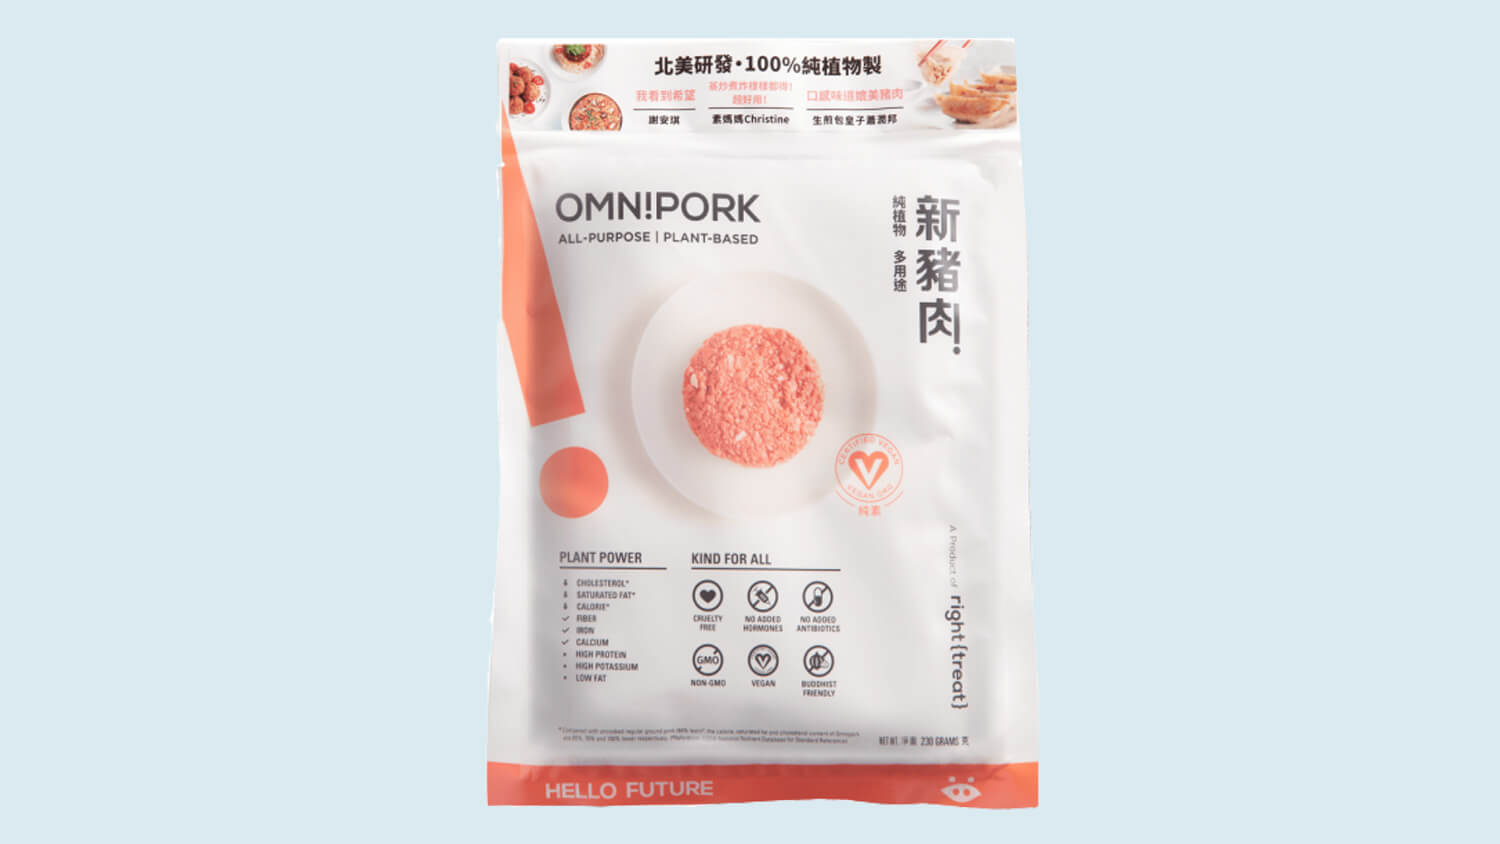 Vegan Superfood Pork ‘Omnipork’ Launches in Hong Kong’s Green Common Stores